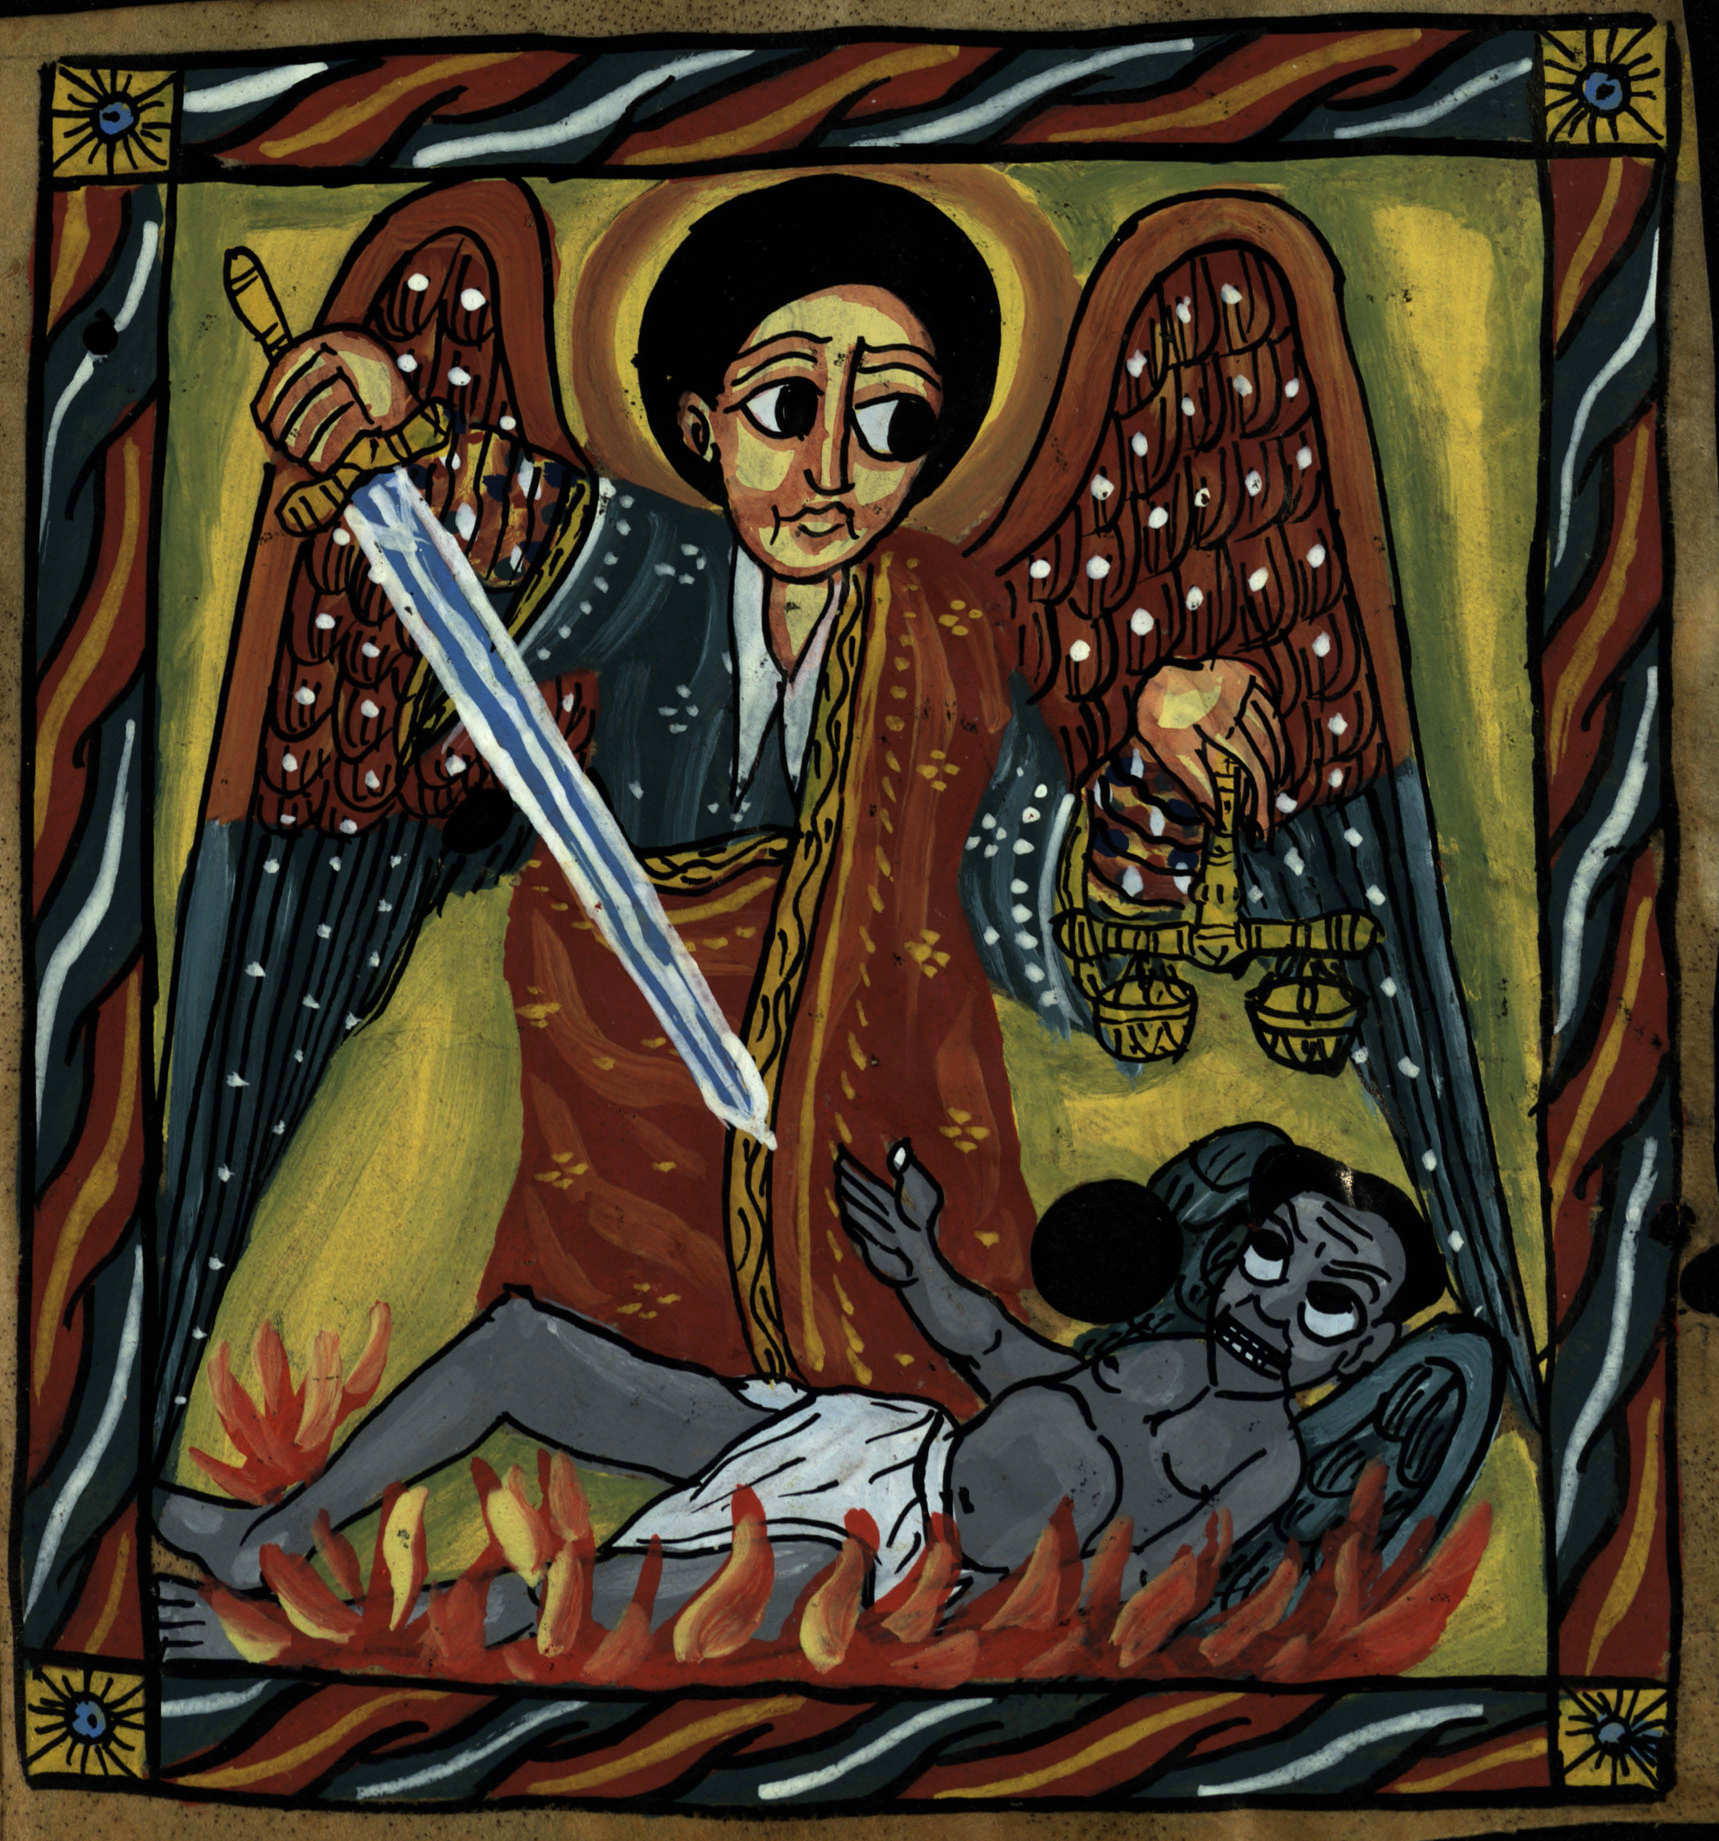 An illustration of Archangel Michael defeating the Devil from an 18th century Ethiopian psalter (St Andrews ms38900)